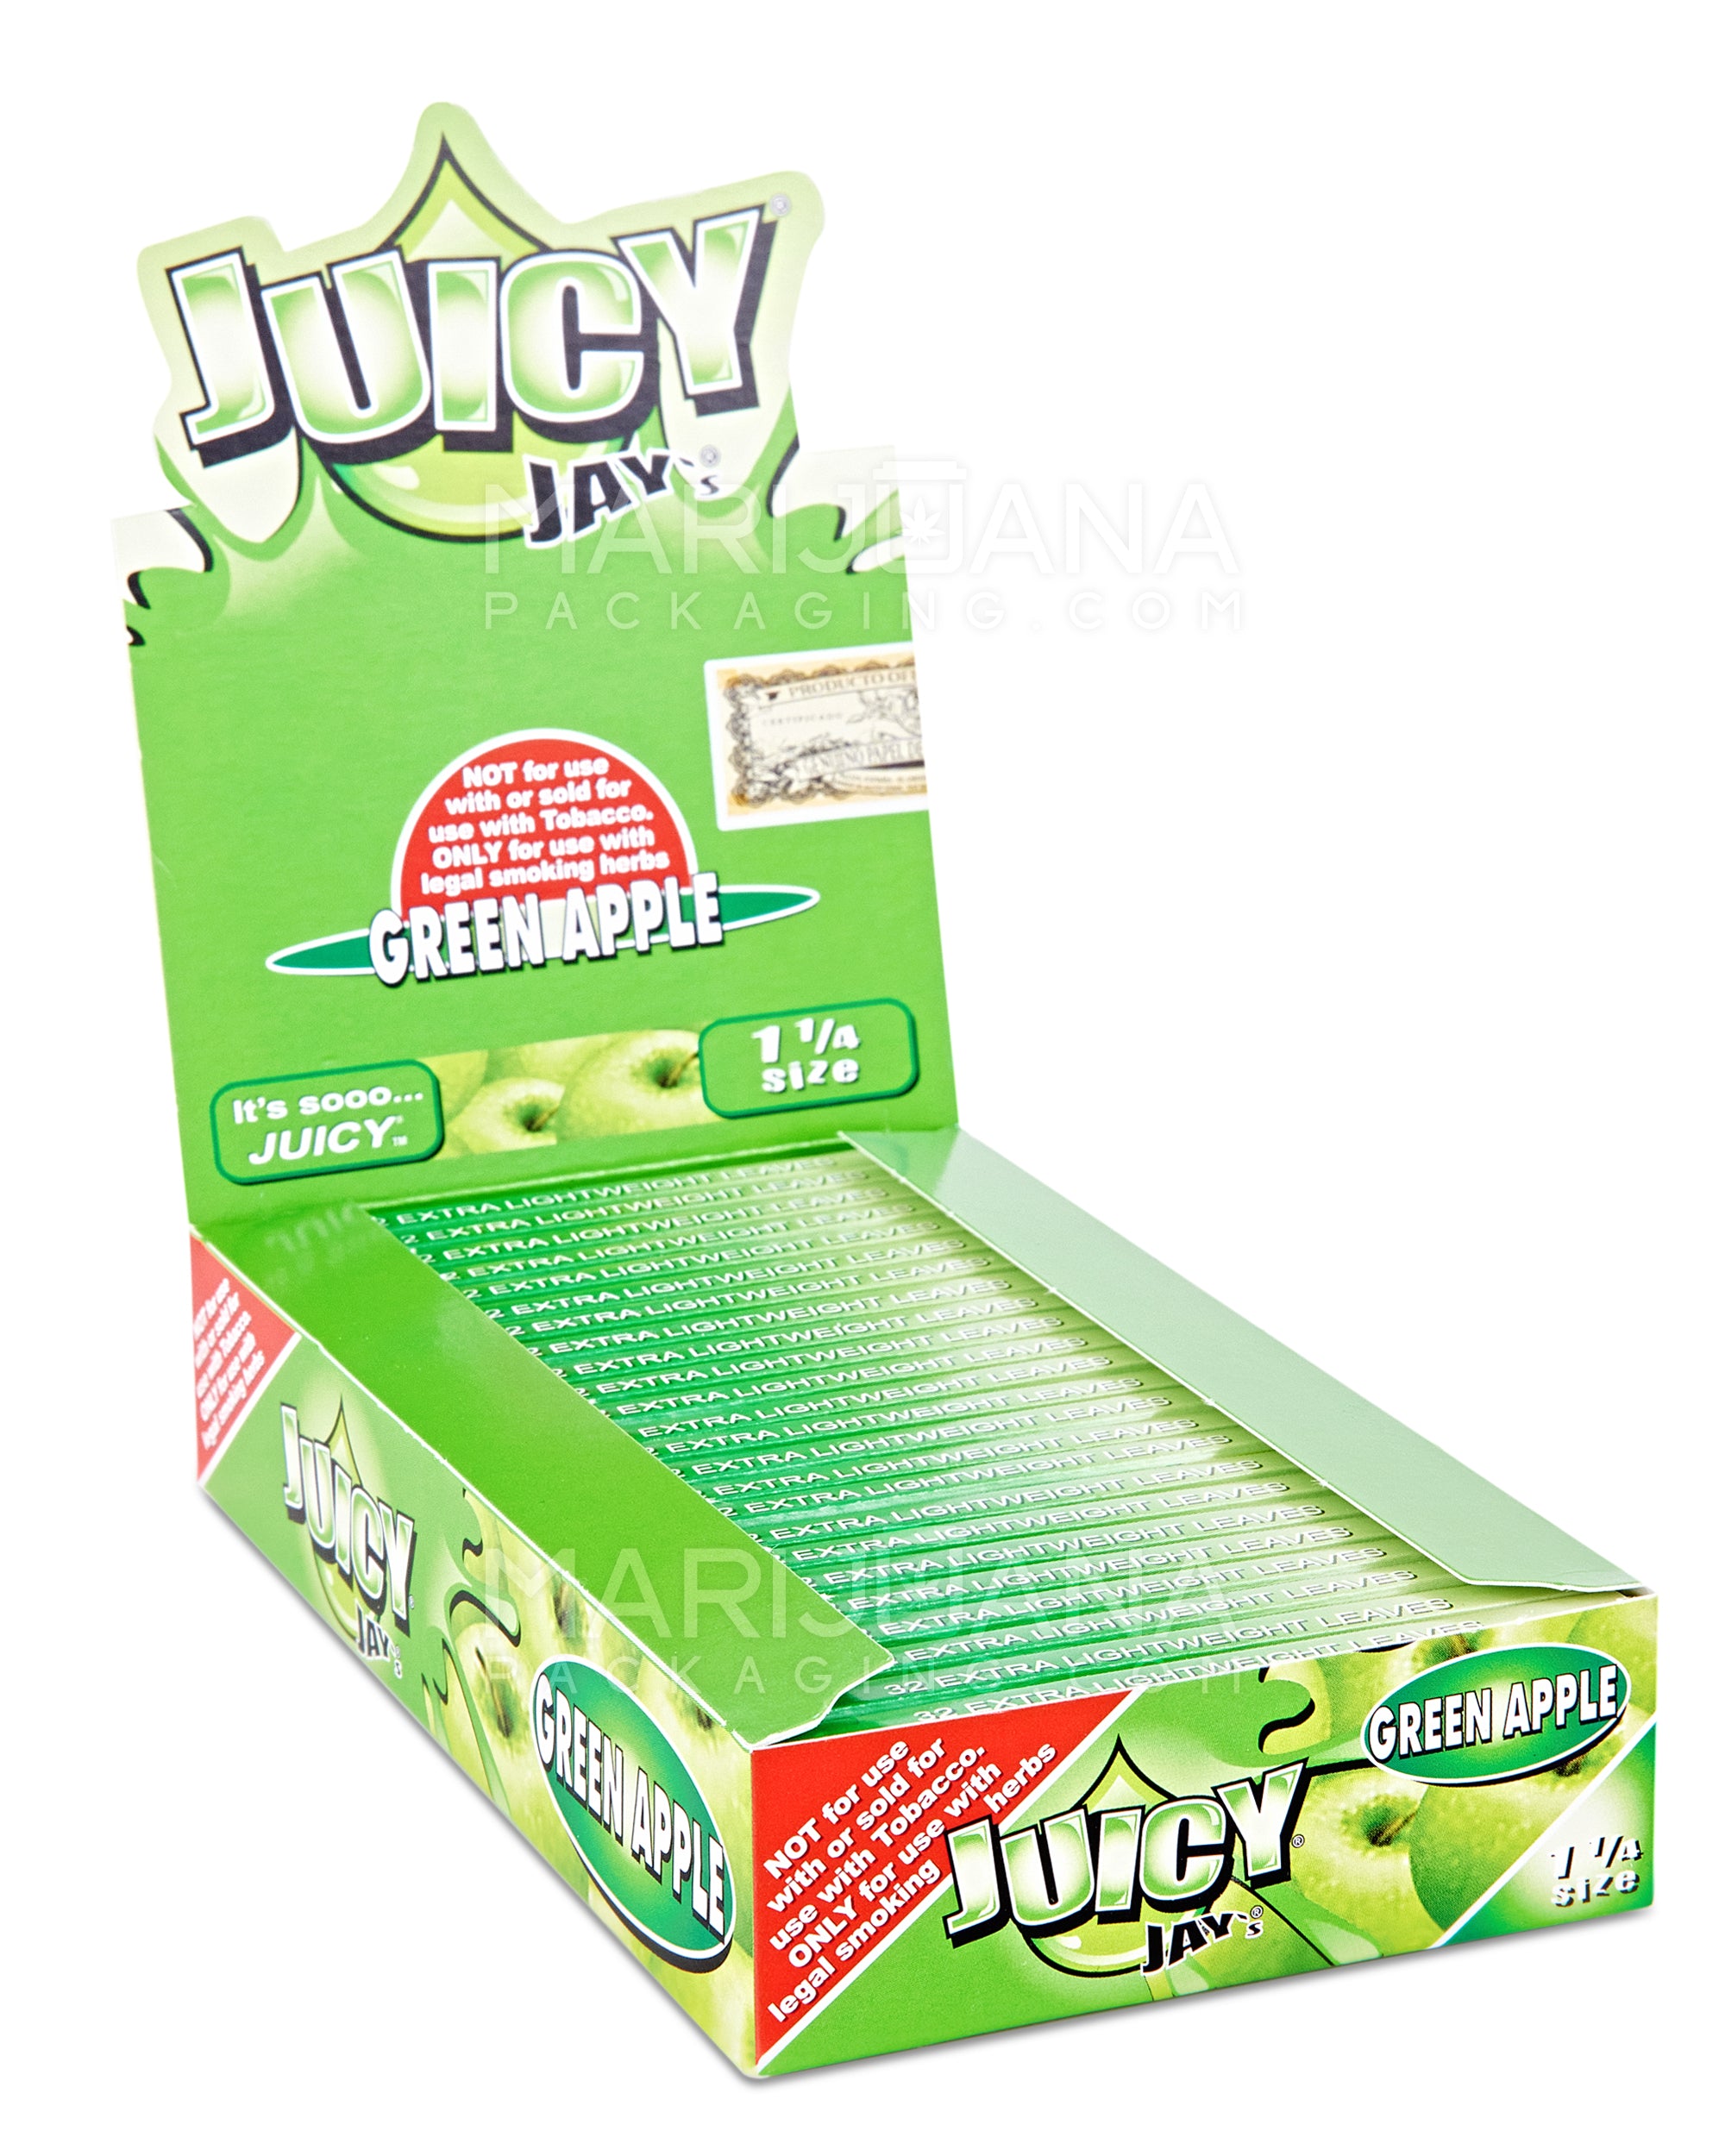 JUICY JAY'S | 'Retail Display' 1 1/4 Size Hemp Rolling Papers | 76mm - Green Apple - 24 Count - 1